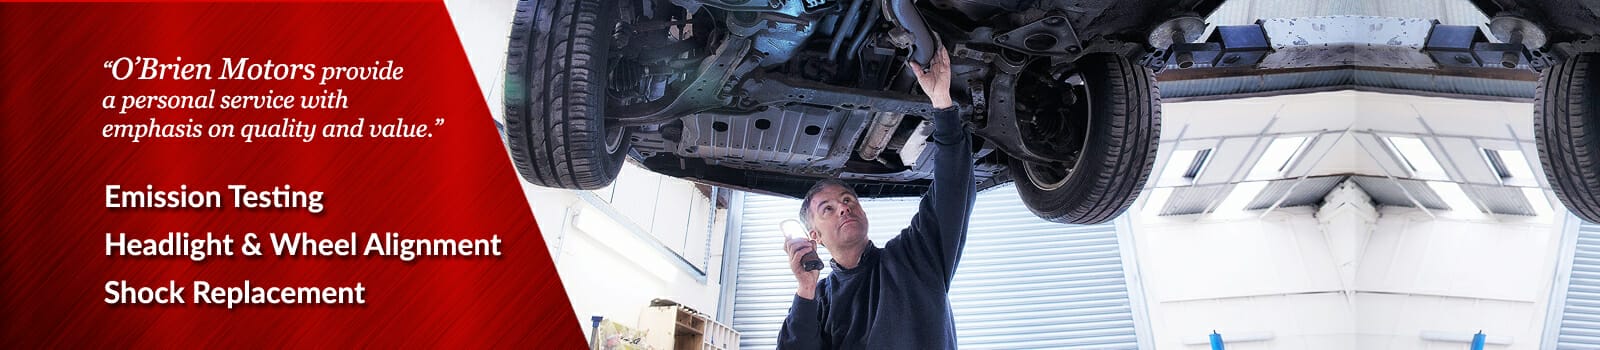 Best Car Services Waterford